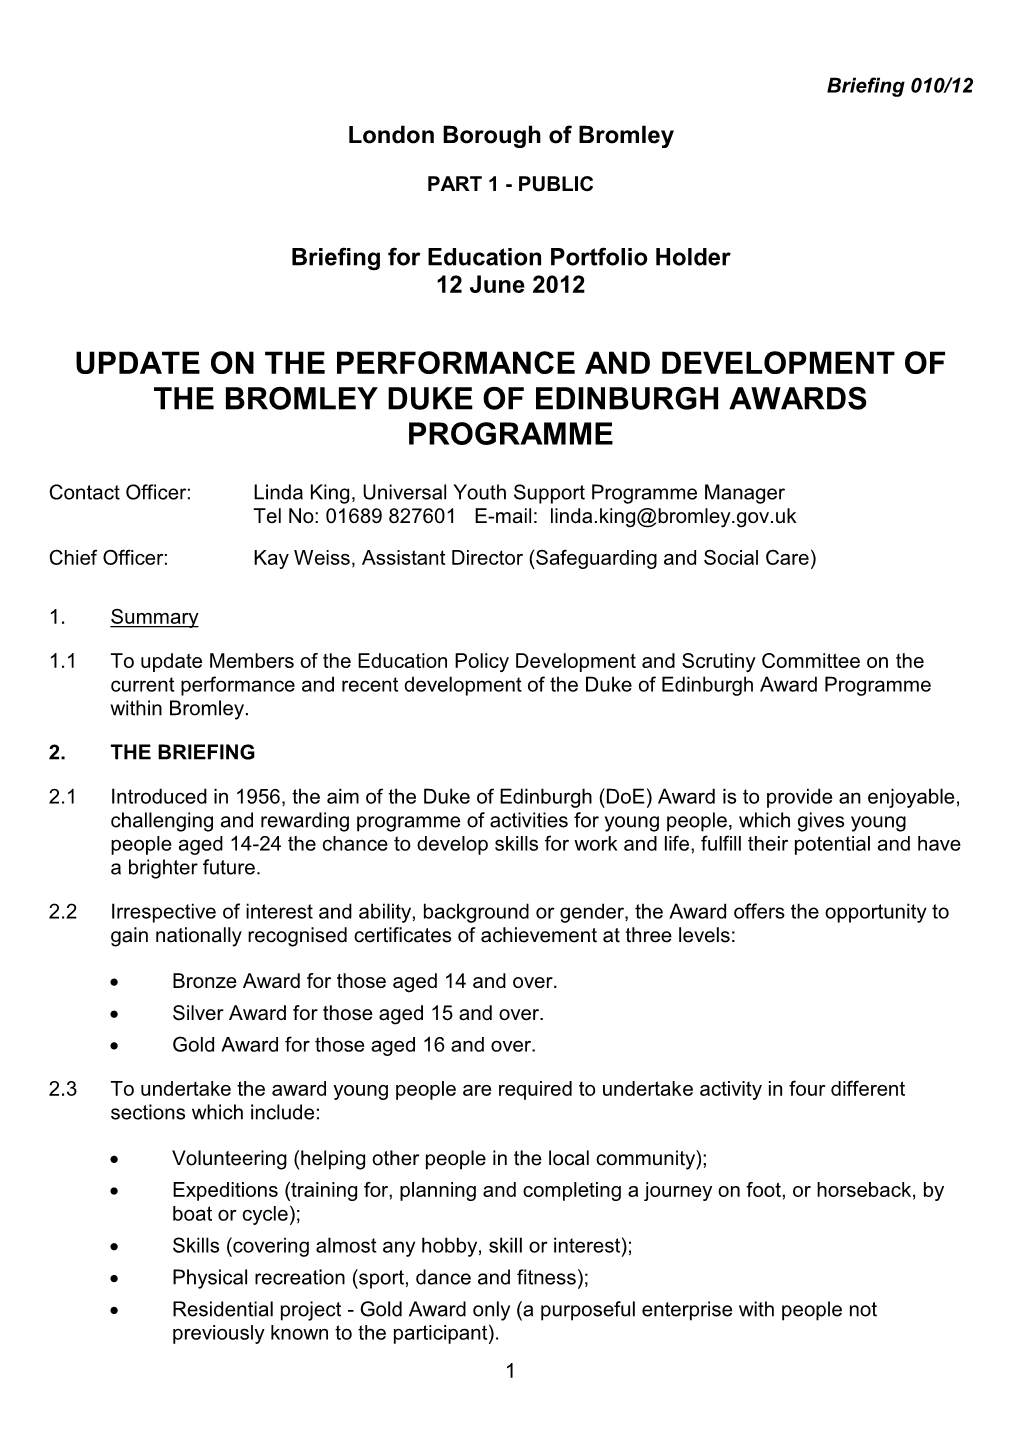 Update on the Performance and Development of the Bromley Duke of Edinburgh Awards Programme